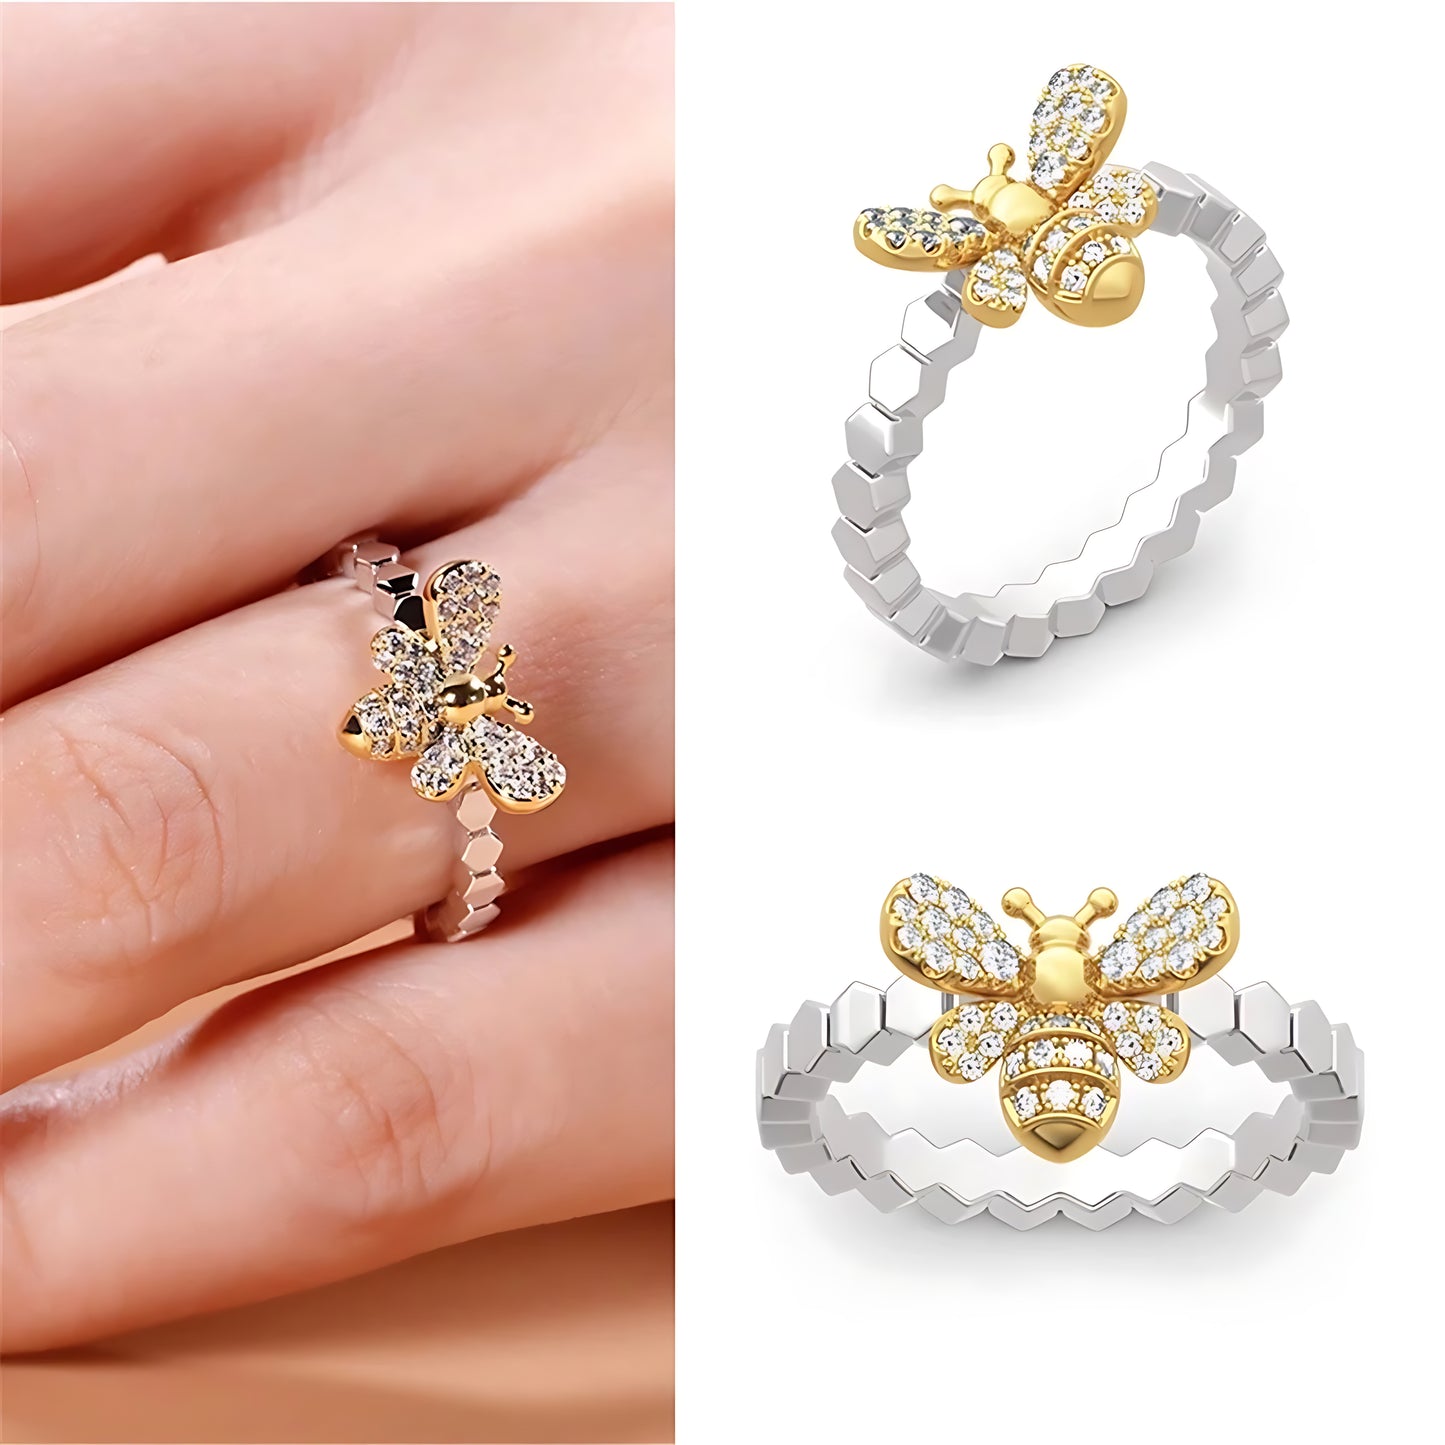 Bee-Inspired Ring - 20% Donation Policy